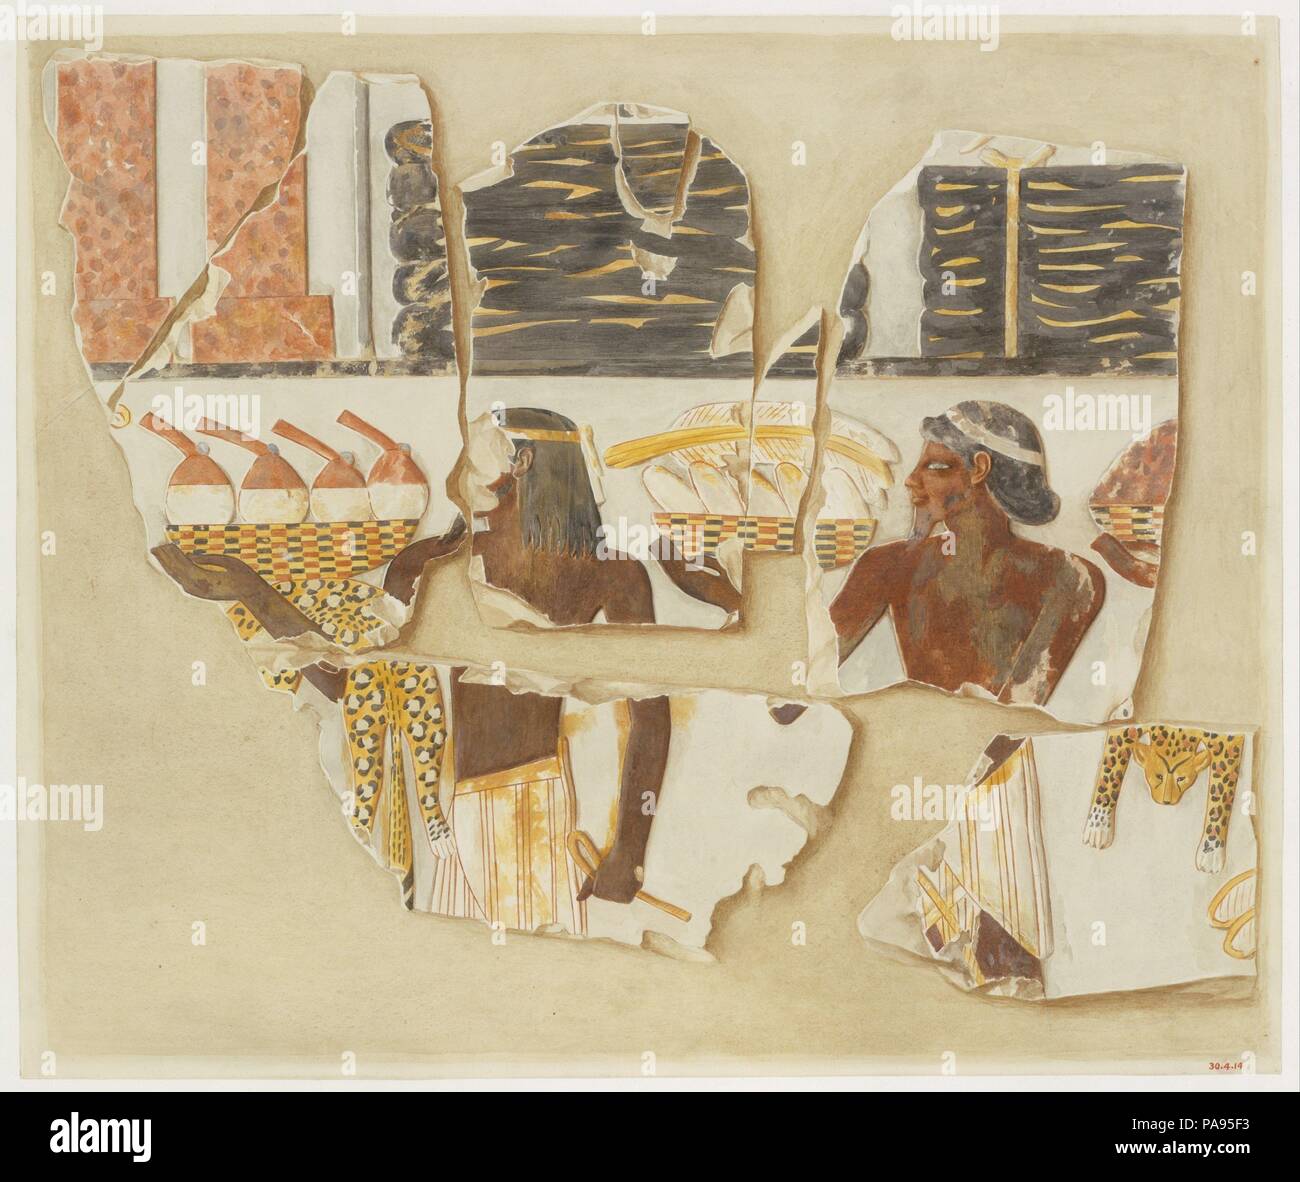 Asians Bringing Gifts from the East, Tomb of Puyemre. Artist: Hugh R. Hopgood. Dimensions: Facsimile: H. 42.8 × W. 50.9 cm (16 7/8 × 20 1/16 in.); Framed: H. 44.5 × W. 52.4 cm (17 1/2 × 20 5/8 in.); Scale. 1:1. Dynasty: Dynasty 18. Reign: Joint reign of Hatshepsut and Thutmose III. Date: ca. 1479-1458 B.C.. Museum: Metropolitan Museum of Art, New York, USA. Stock Photo